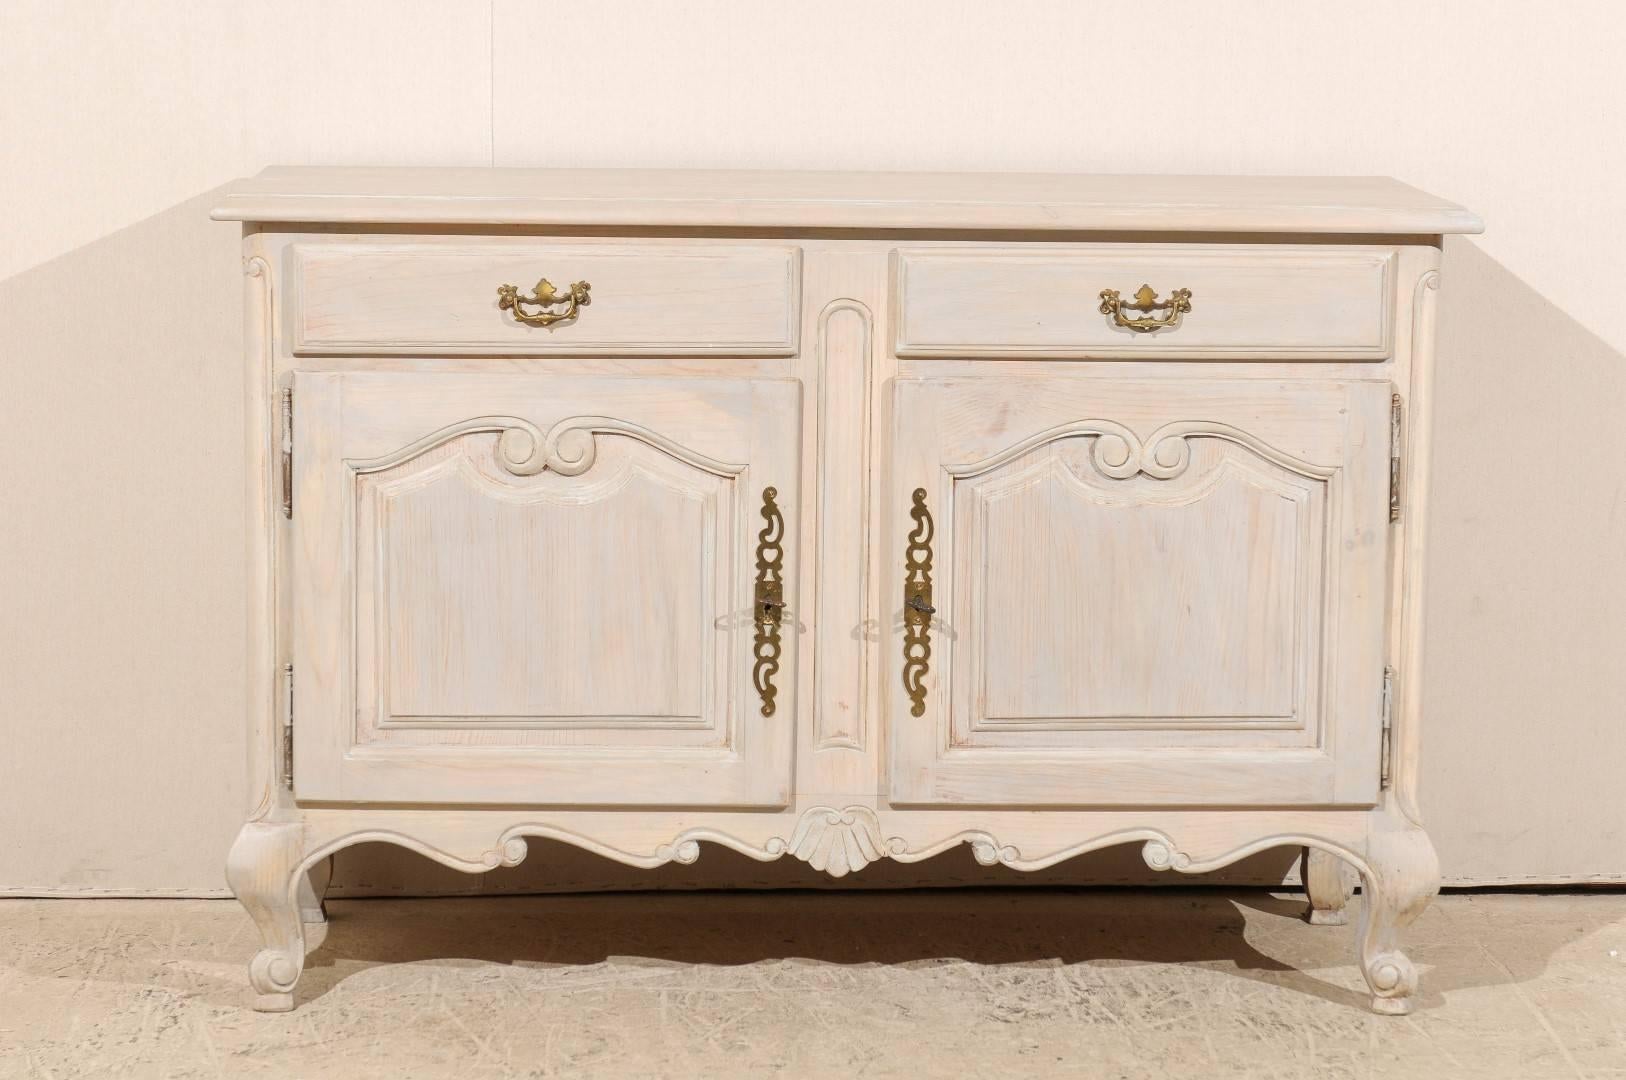 A French painted wood buffet. This vintage painted wood buffet features two drawers over two doors. The panels on the doors have been delicately carved. The skirt is scalloped with a shell motif in its center and the buffet is raised on scrolled